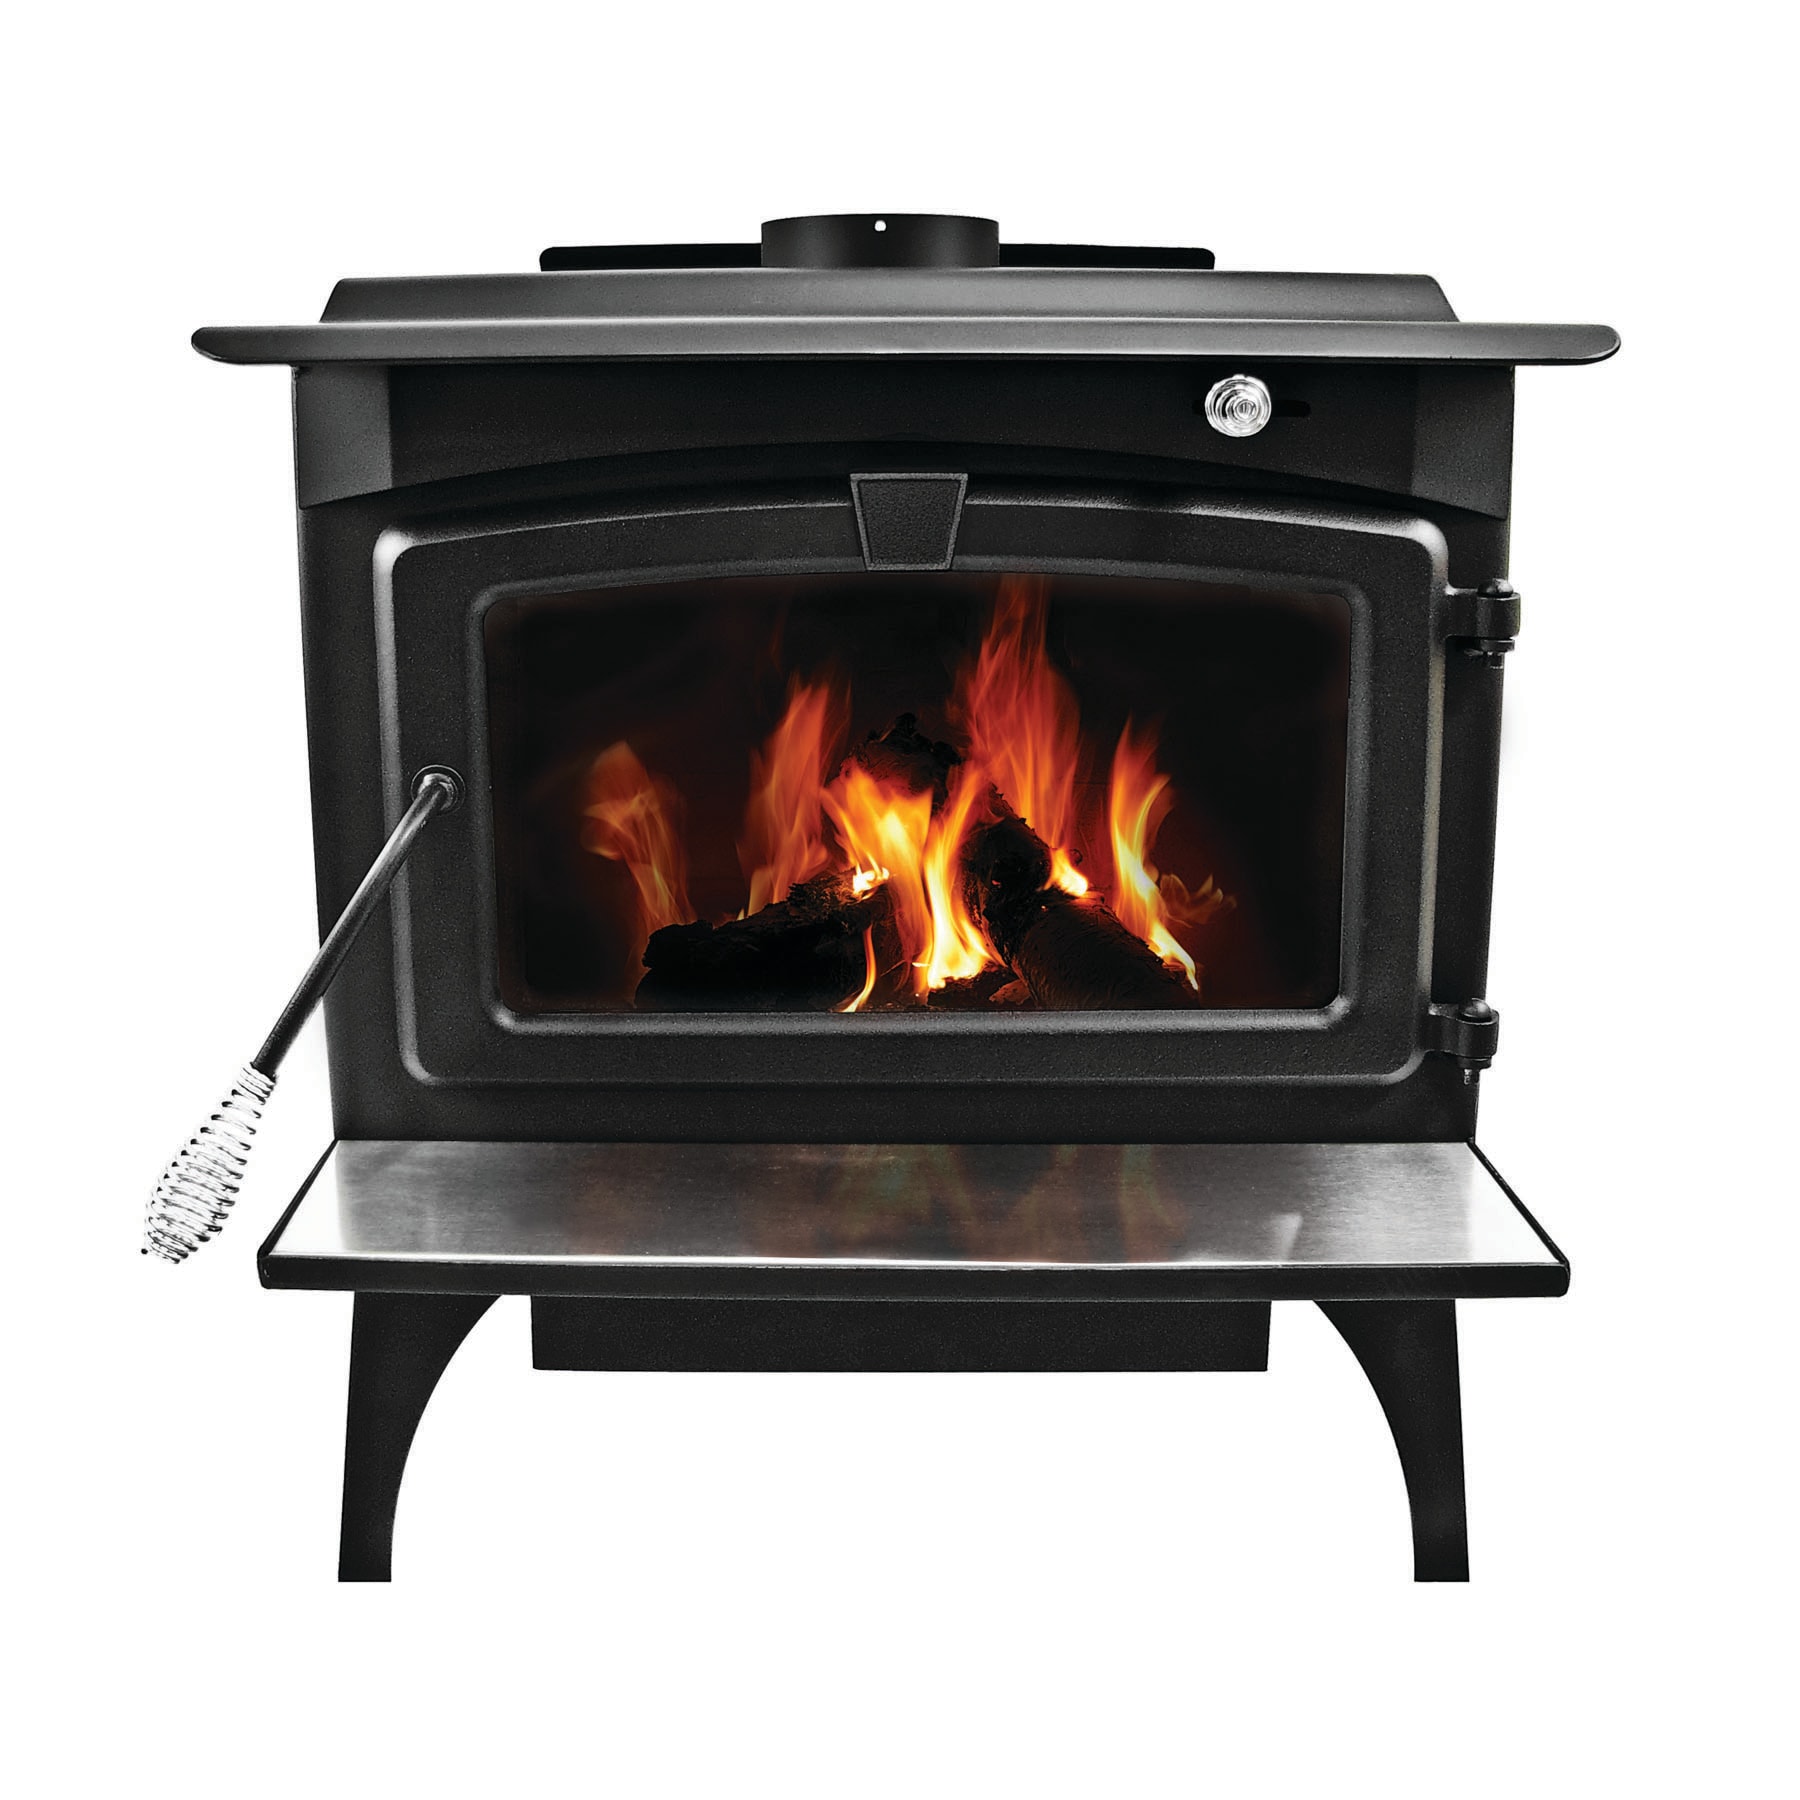 Stove hearths, floor plates, stands and heat shields